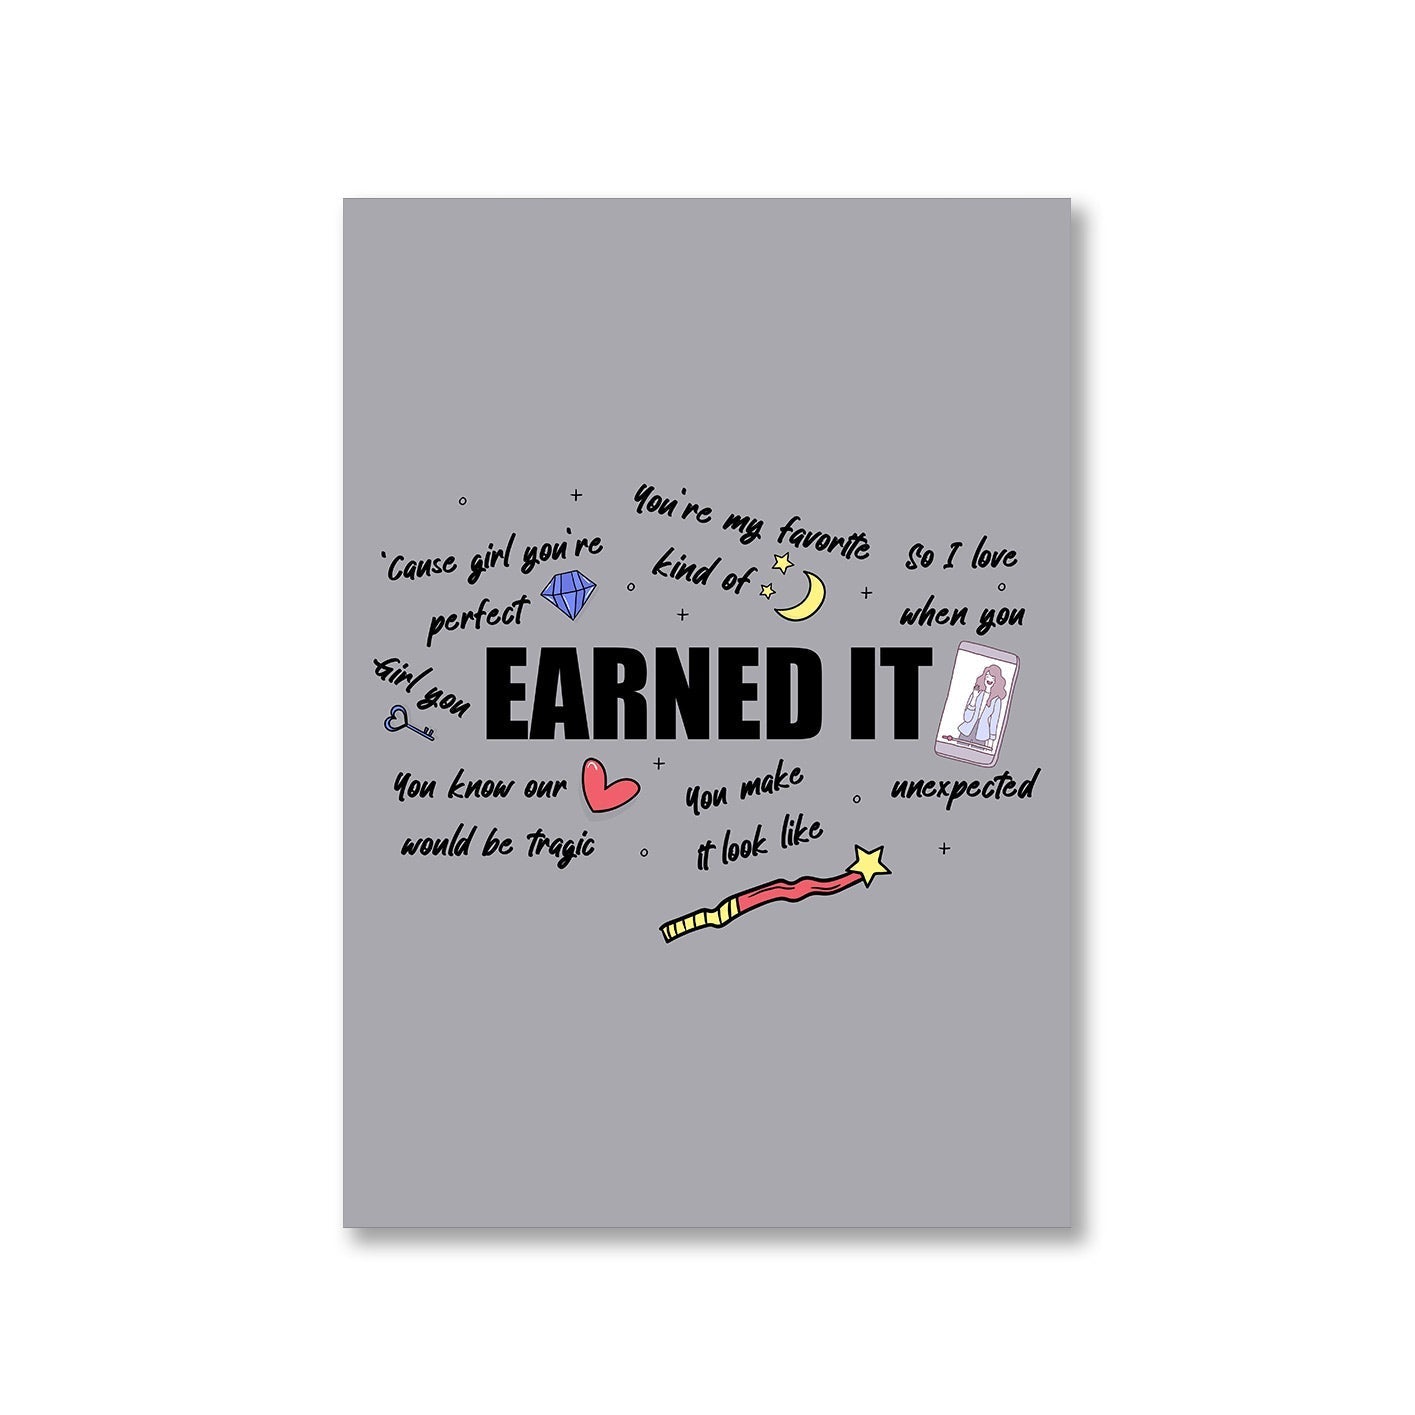 the weeknd earned it poster wall art buy online united states of america usa the banyan tee tbt a4